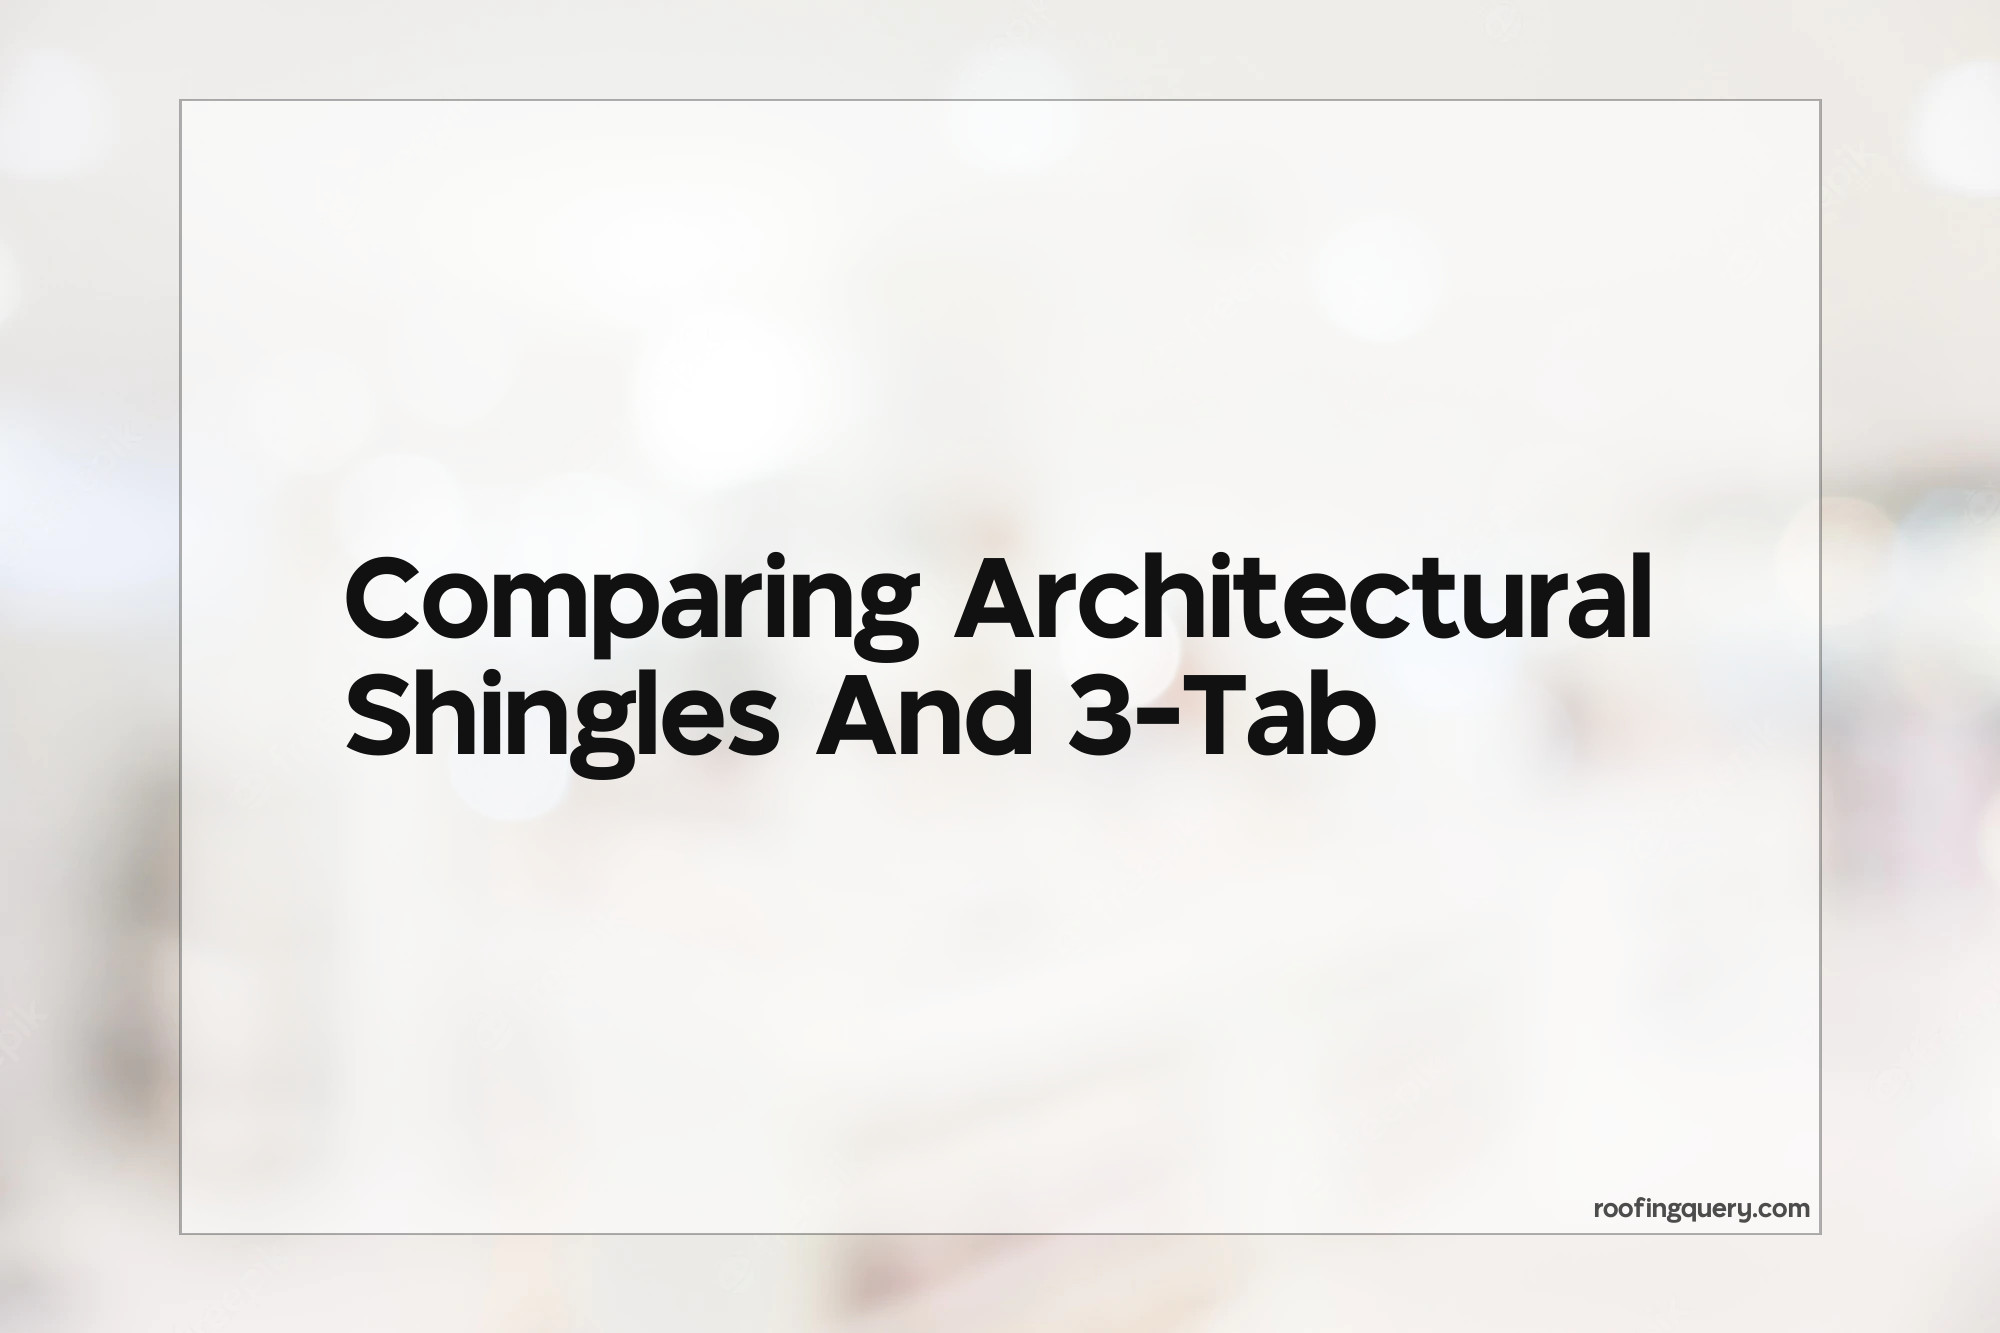 Comparing Architectural Shingles And 3-Tab